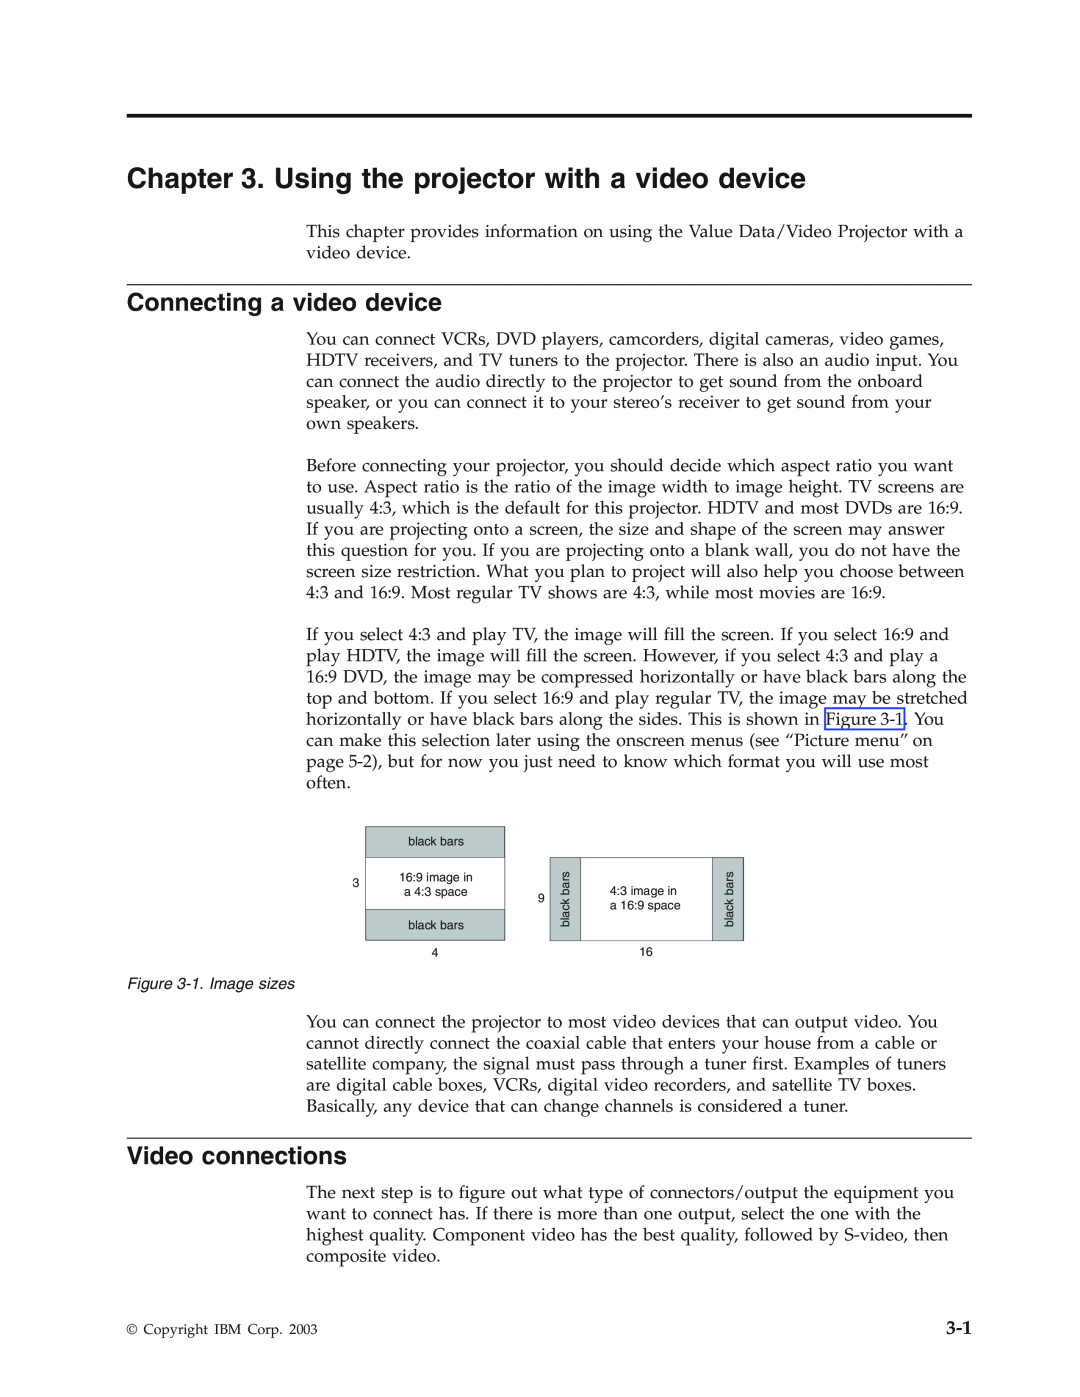 IBM Partner Pavilion iLV300 manual Using the projector with a video device, Connecting a video device, Video connections 